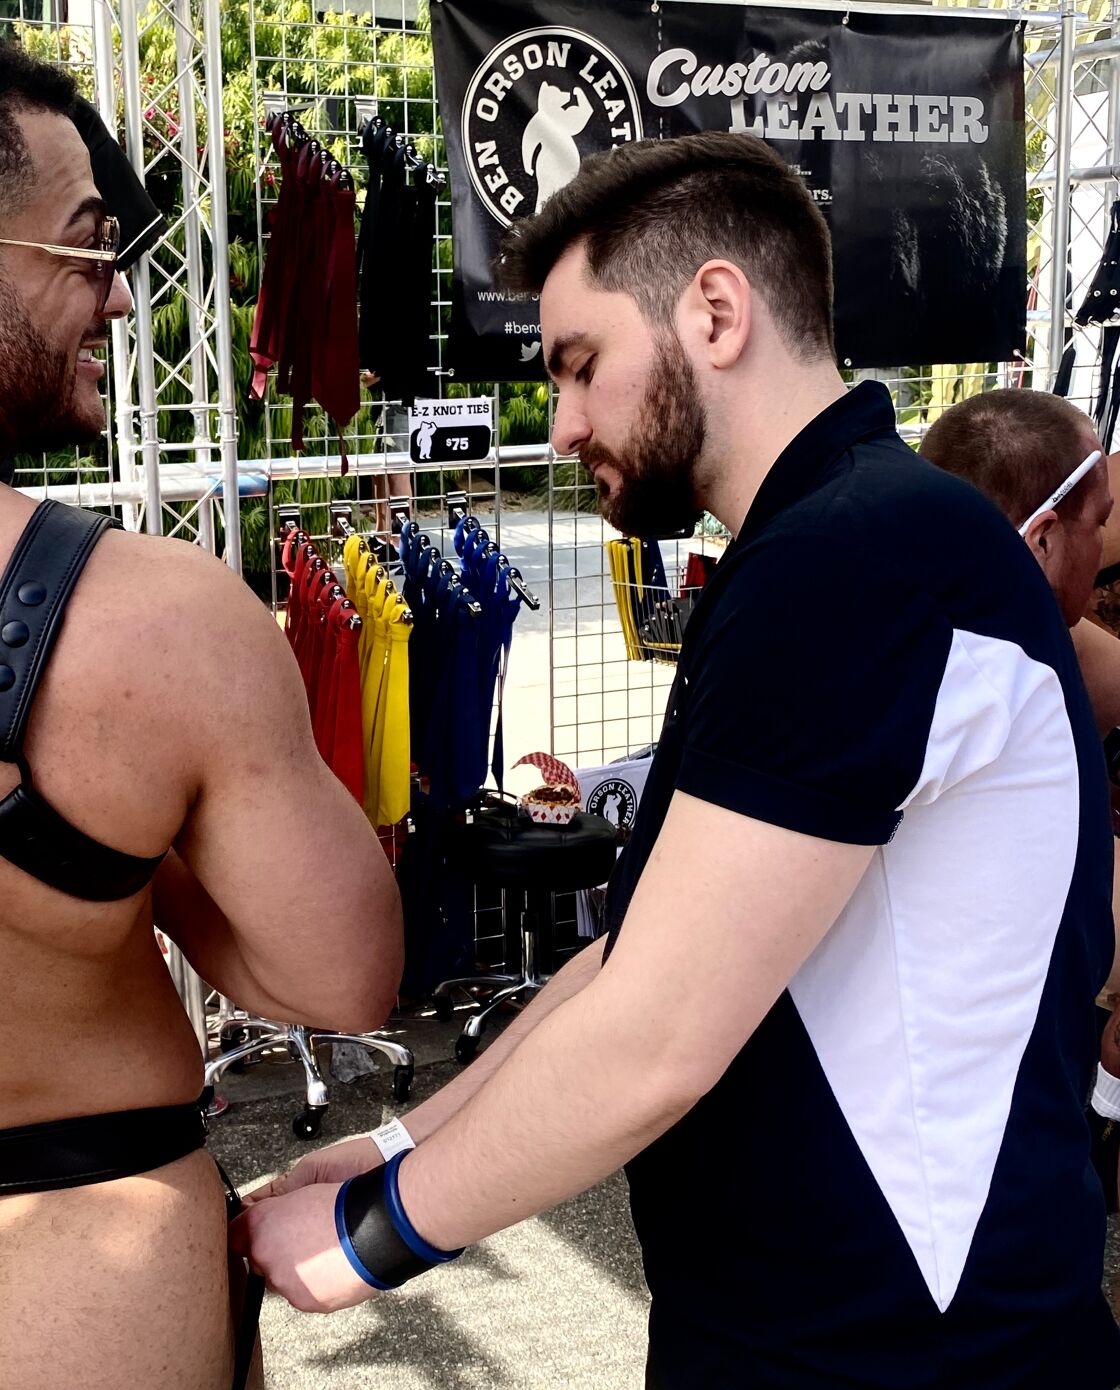 Logan Cuccia fitting a kinky customer's new jockstrap at the Ben Orson Leather booth.